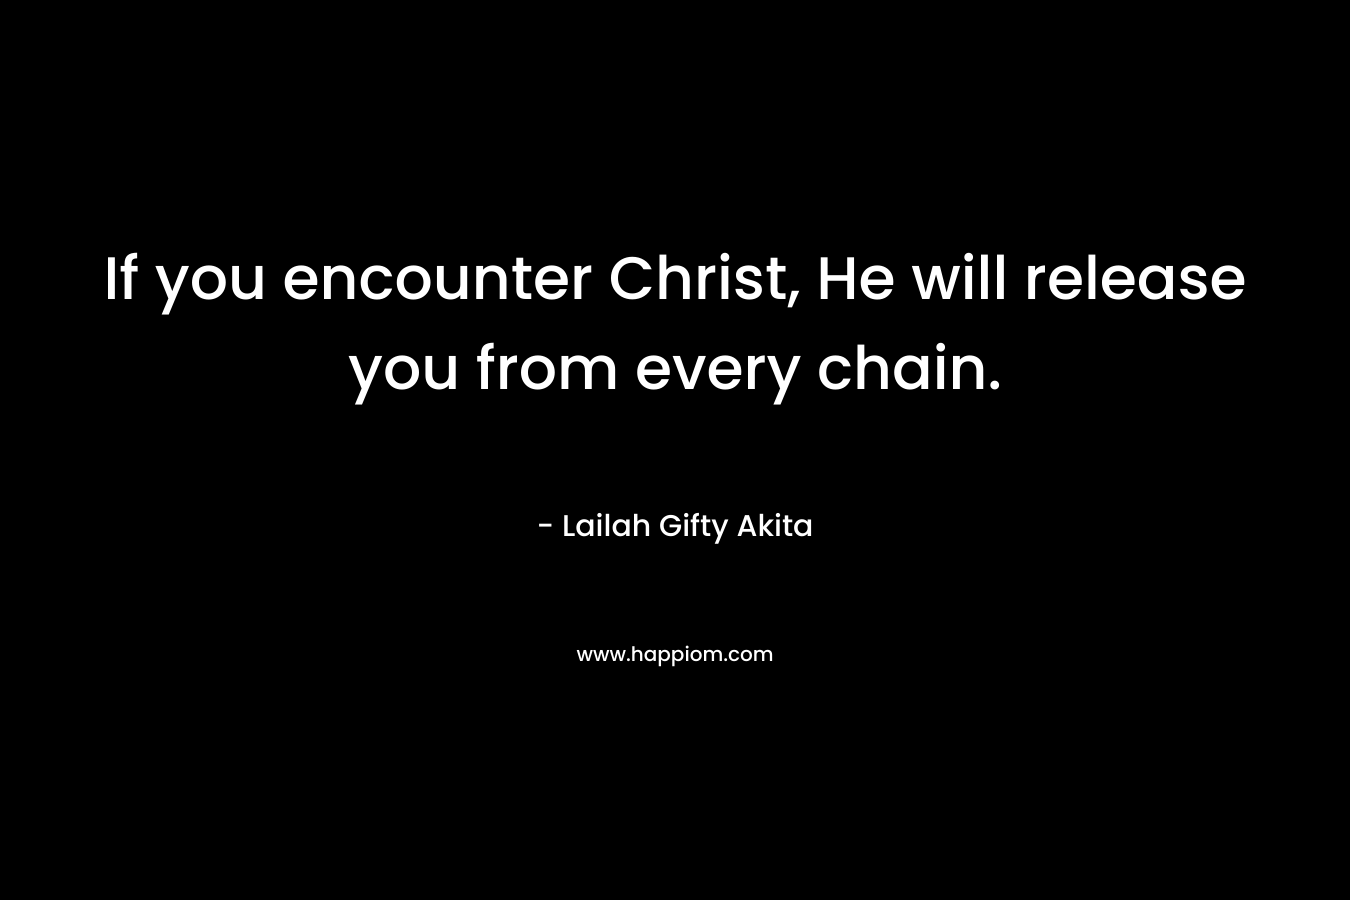 If you encounter Christ, He will release you from every chain.